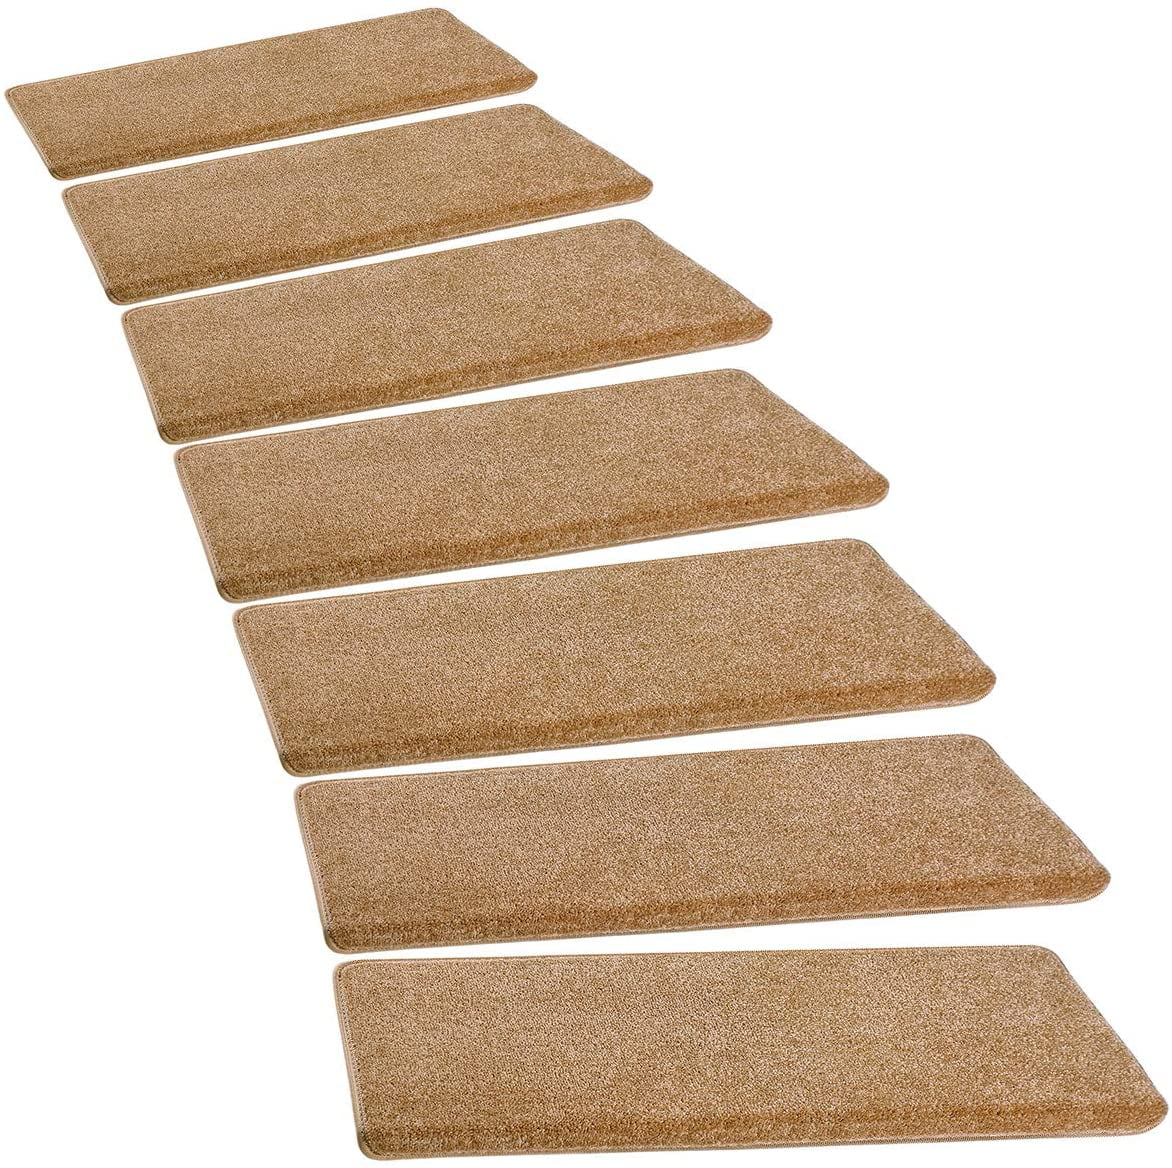 Non-Slip Safety Treads Stairs Mats Indoor Outdoor Self Adhesive Pack of 5 